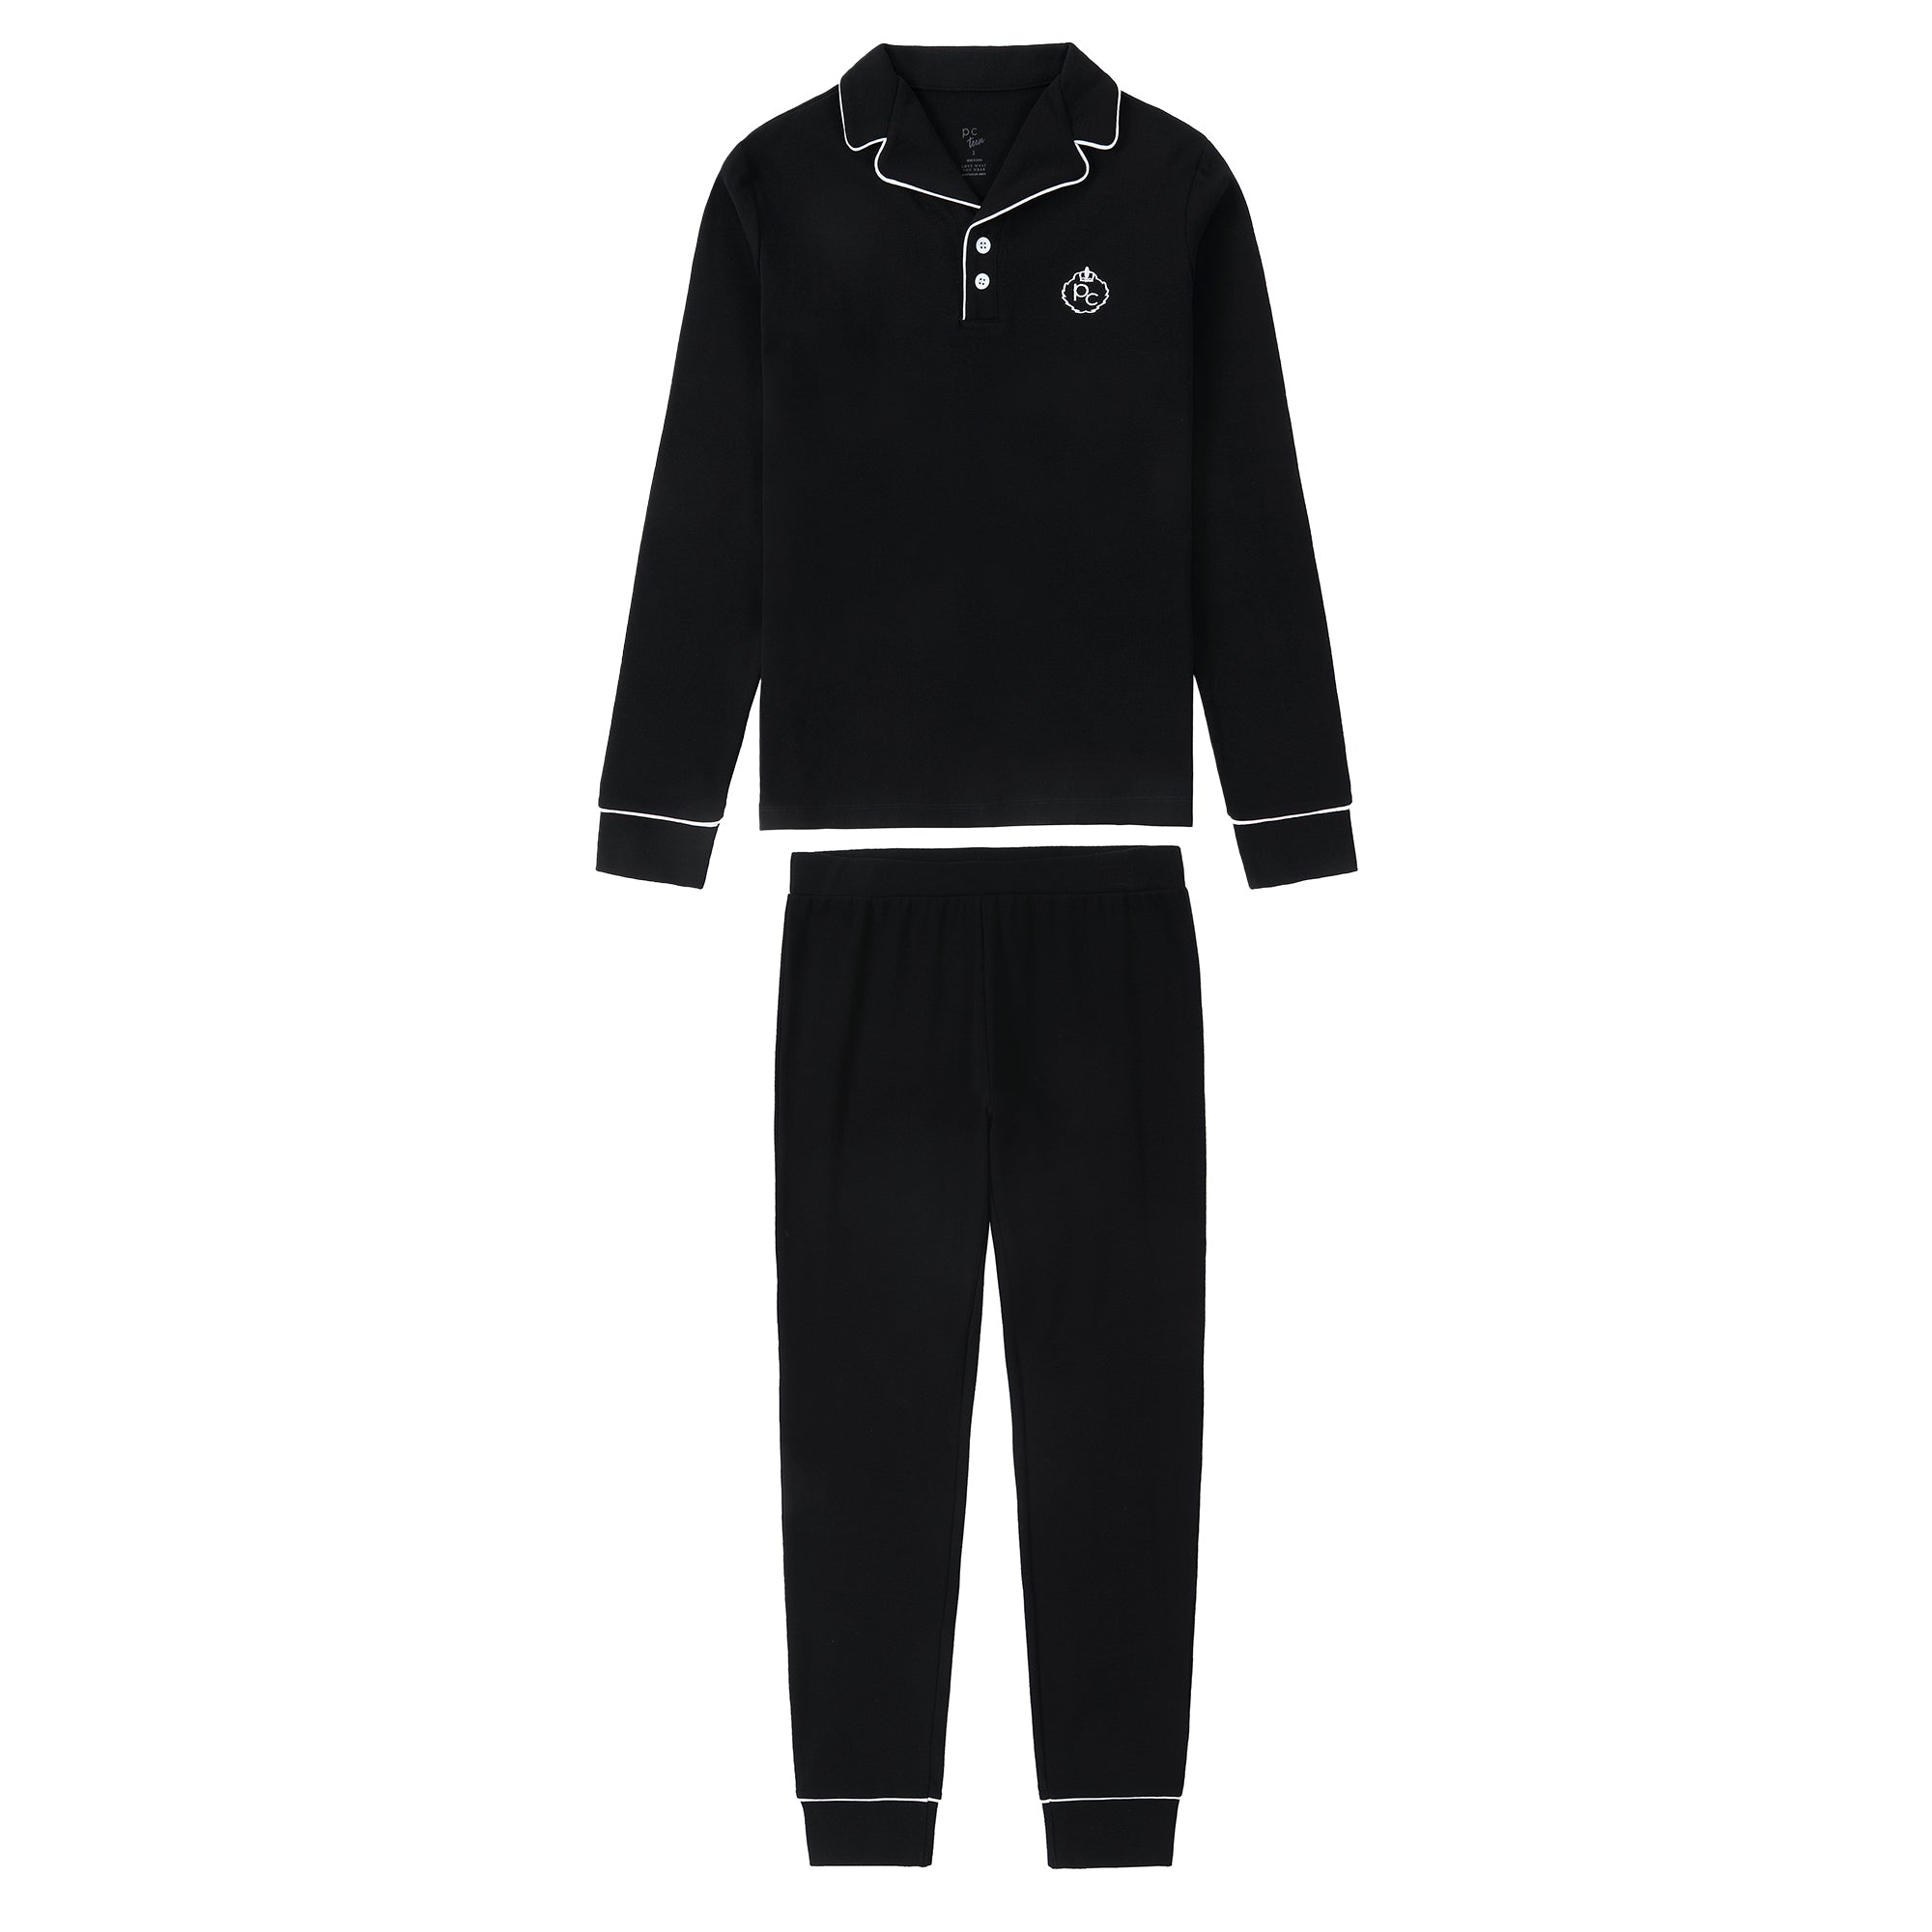 Black Collar Pajama With White Accents